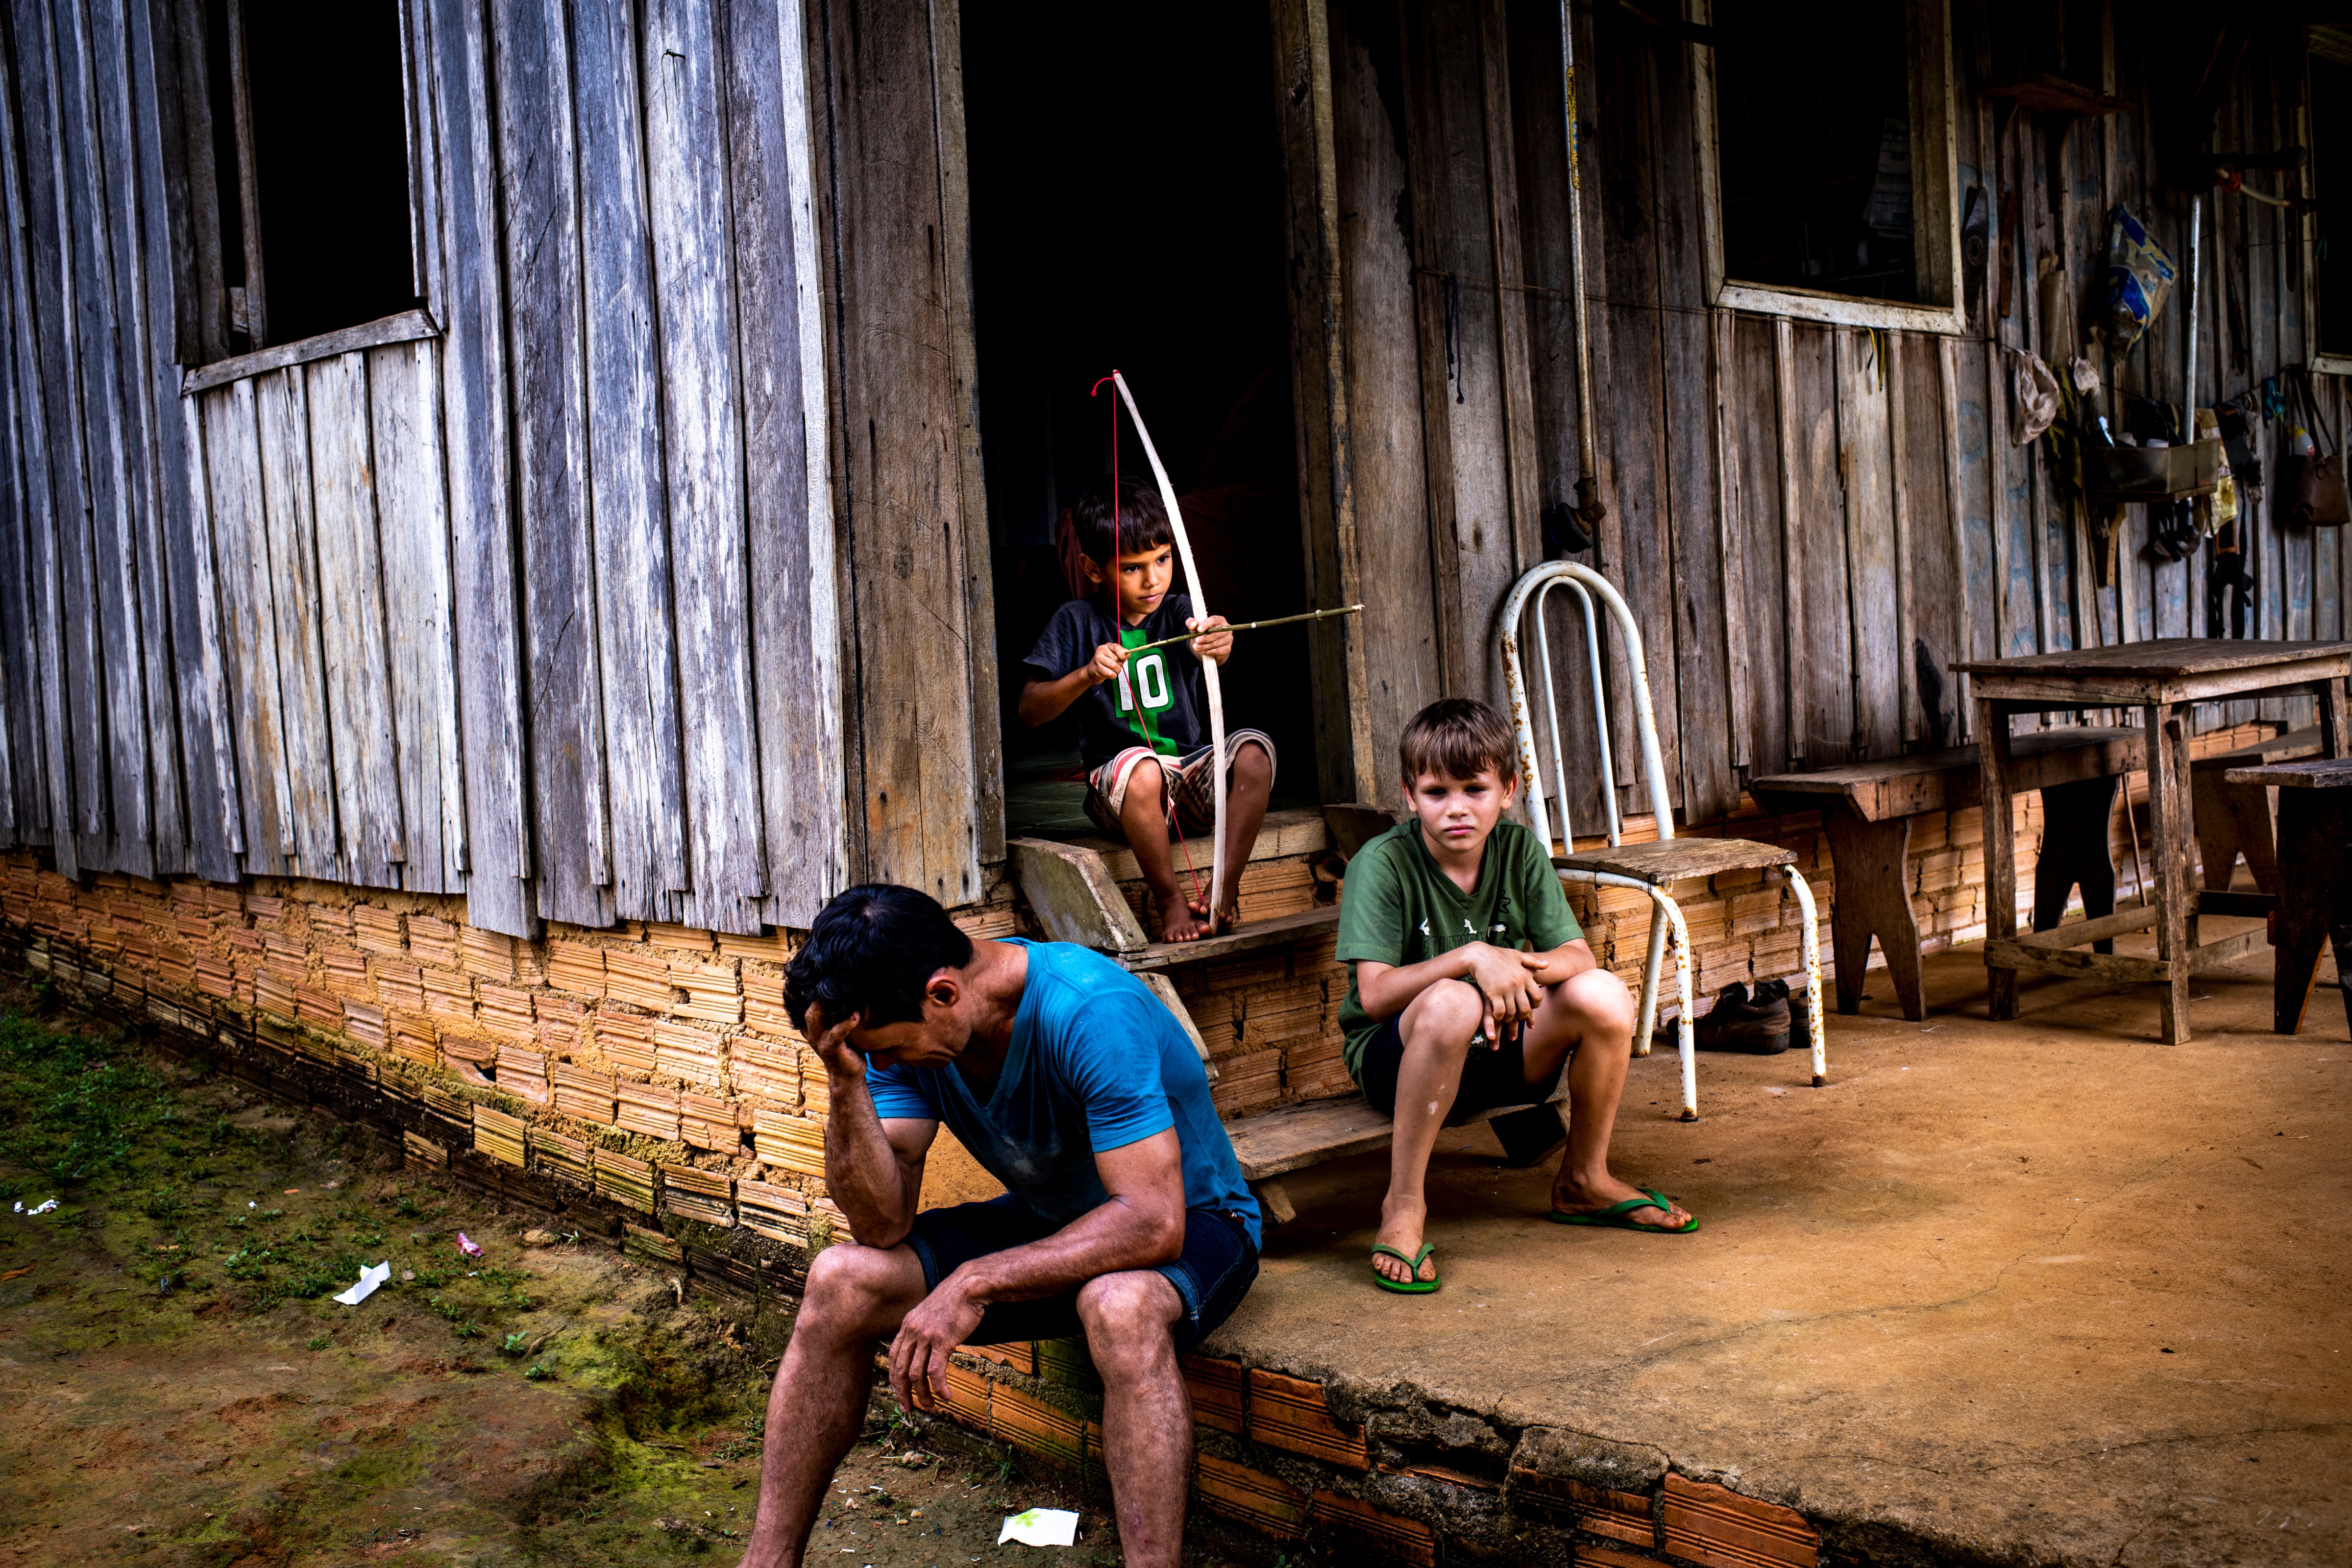 Rubber tappers work on government-protected land, which provides a bulwark against deforestation. But one rubber tapper, Marcelo Firmiano da Silva, photographed with two sons on Feb. 16, says 18 of his colleagues have been killed since 2002. Sept. 23 issue. (Sebastián Liste—NOOR for TIME)